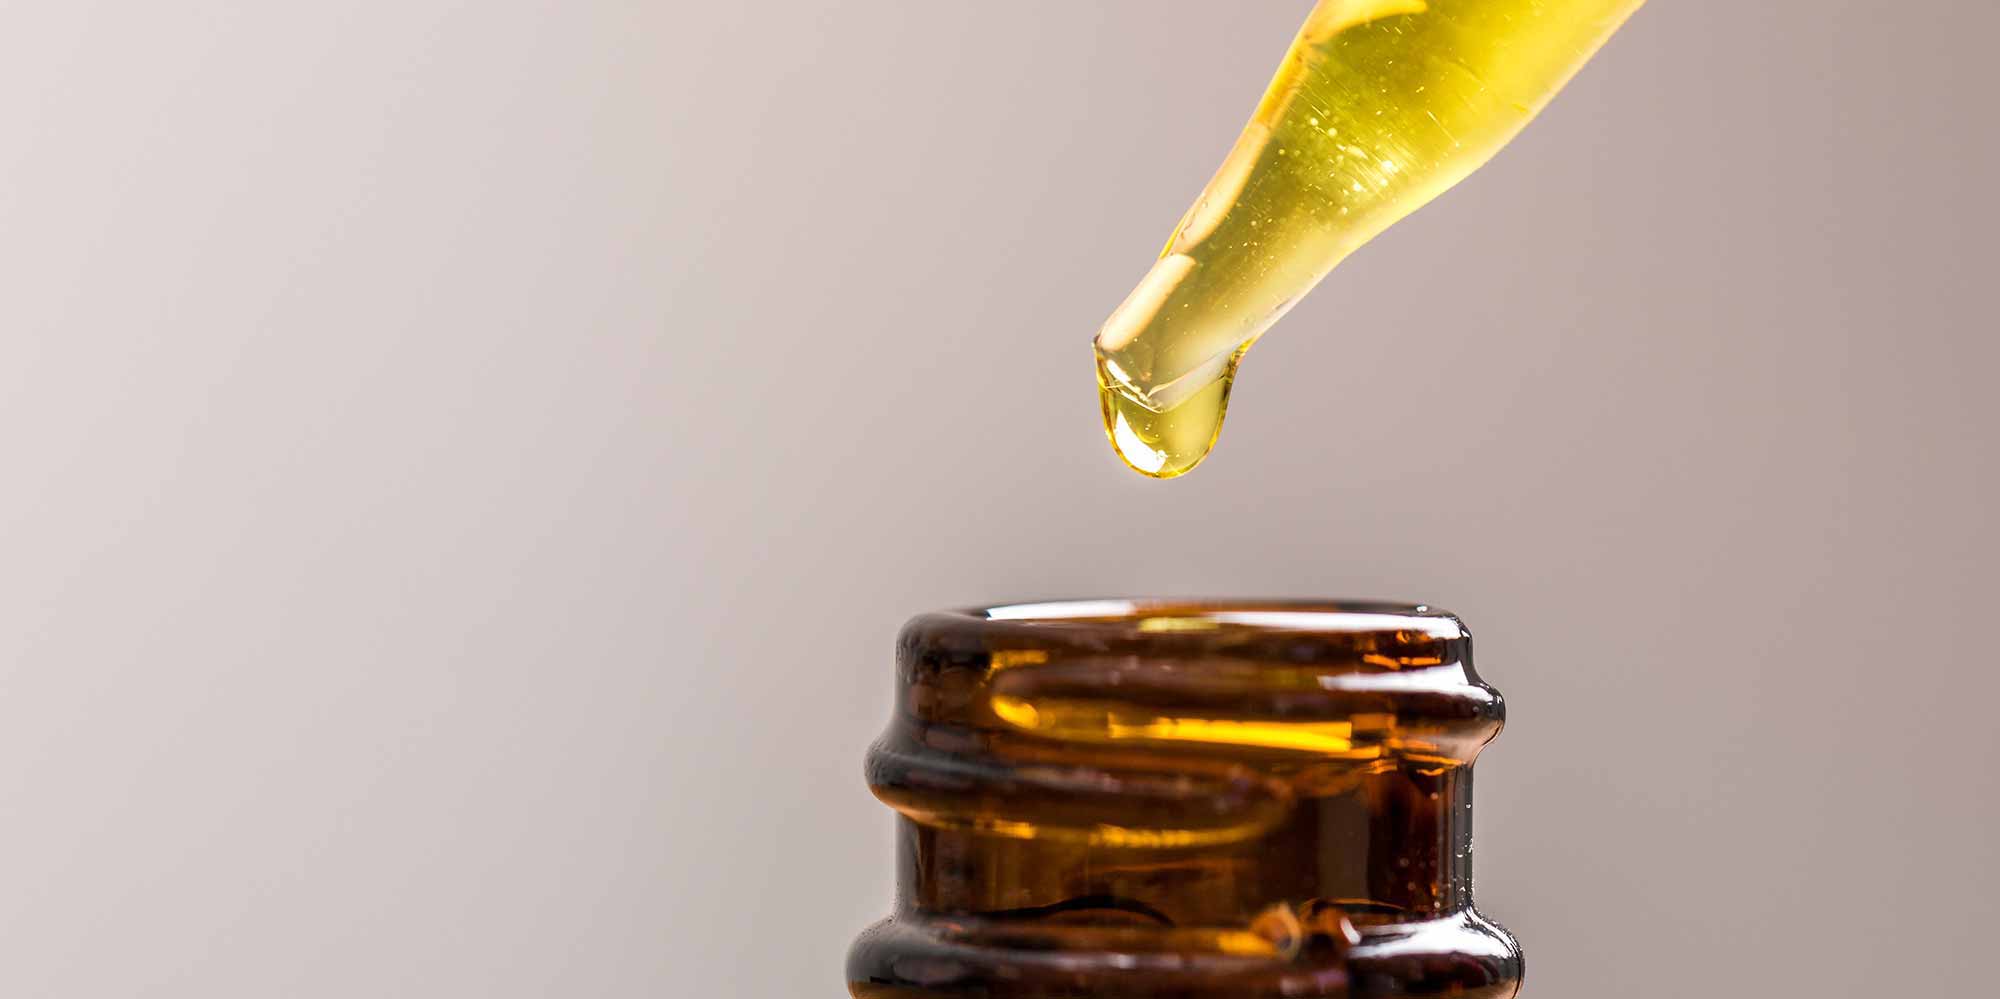 All about tinctures